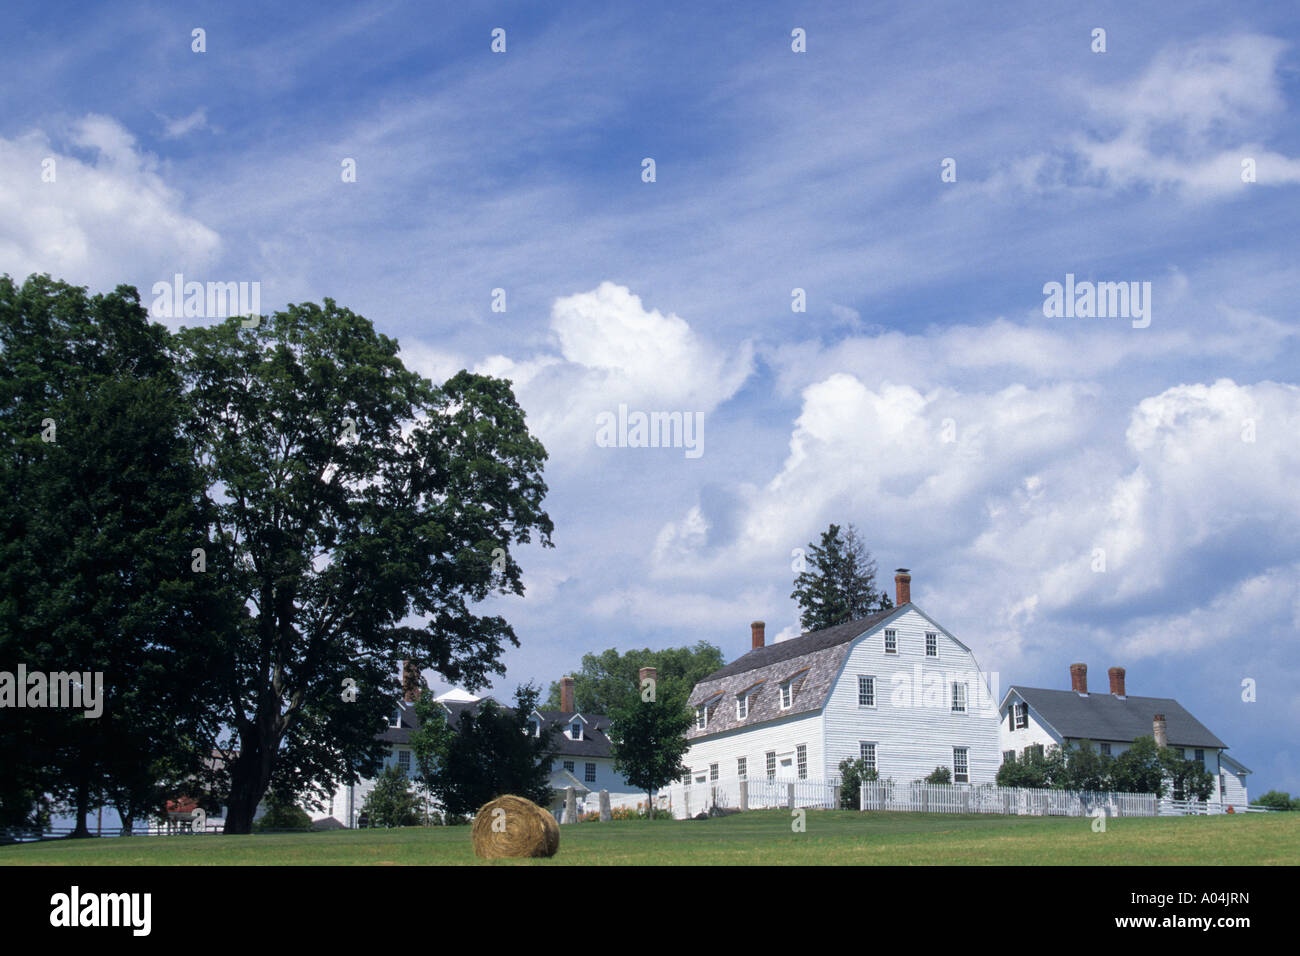 MEETING HOUSE (CIRCA 1792) IN THE CANTERBURY SHAKER VILLAGE, CENTRAL NEW HAMPSHIRE. MID-SUMMER. Stock Photo